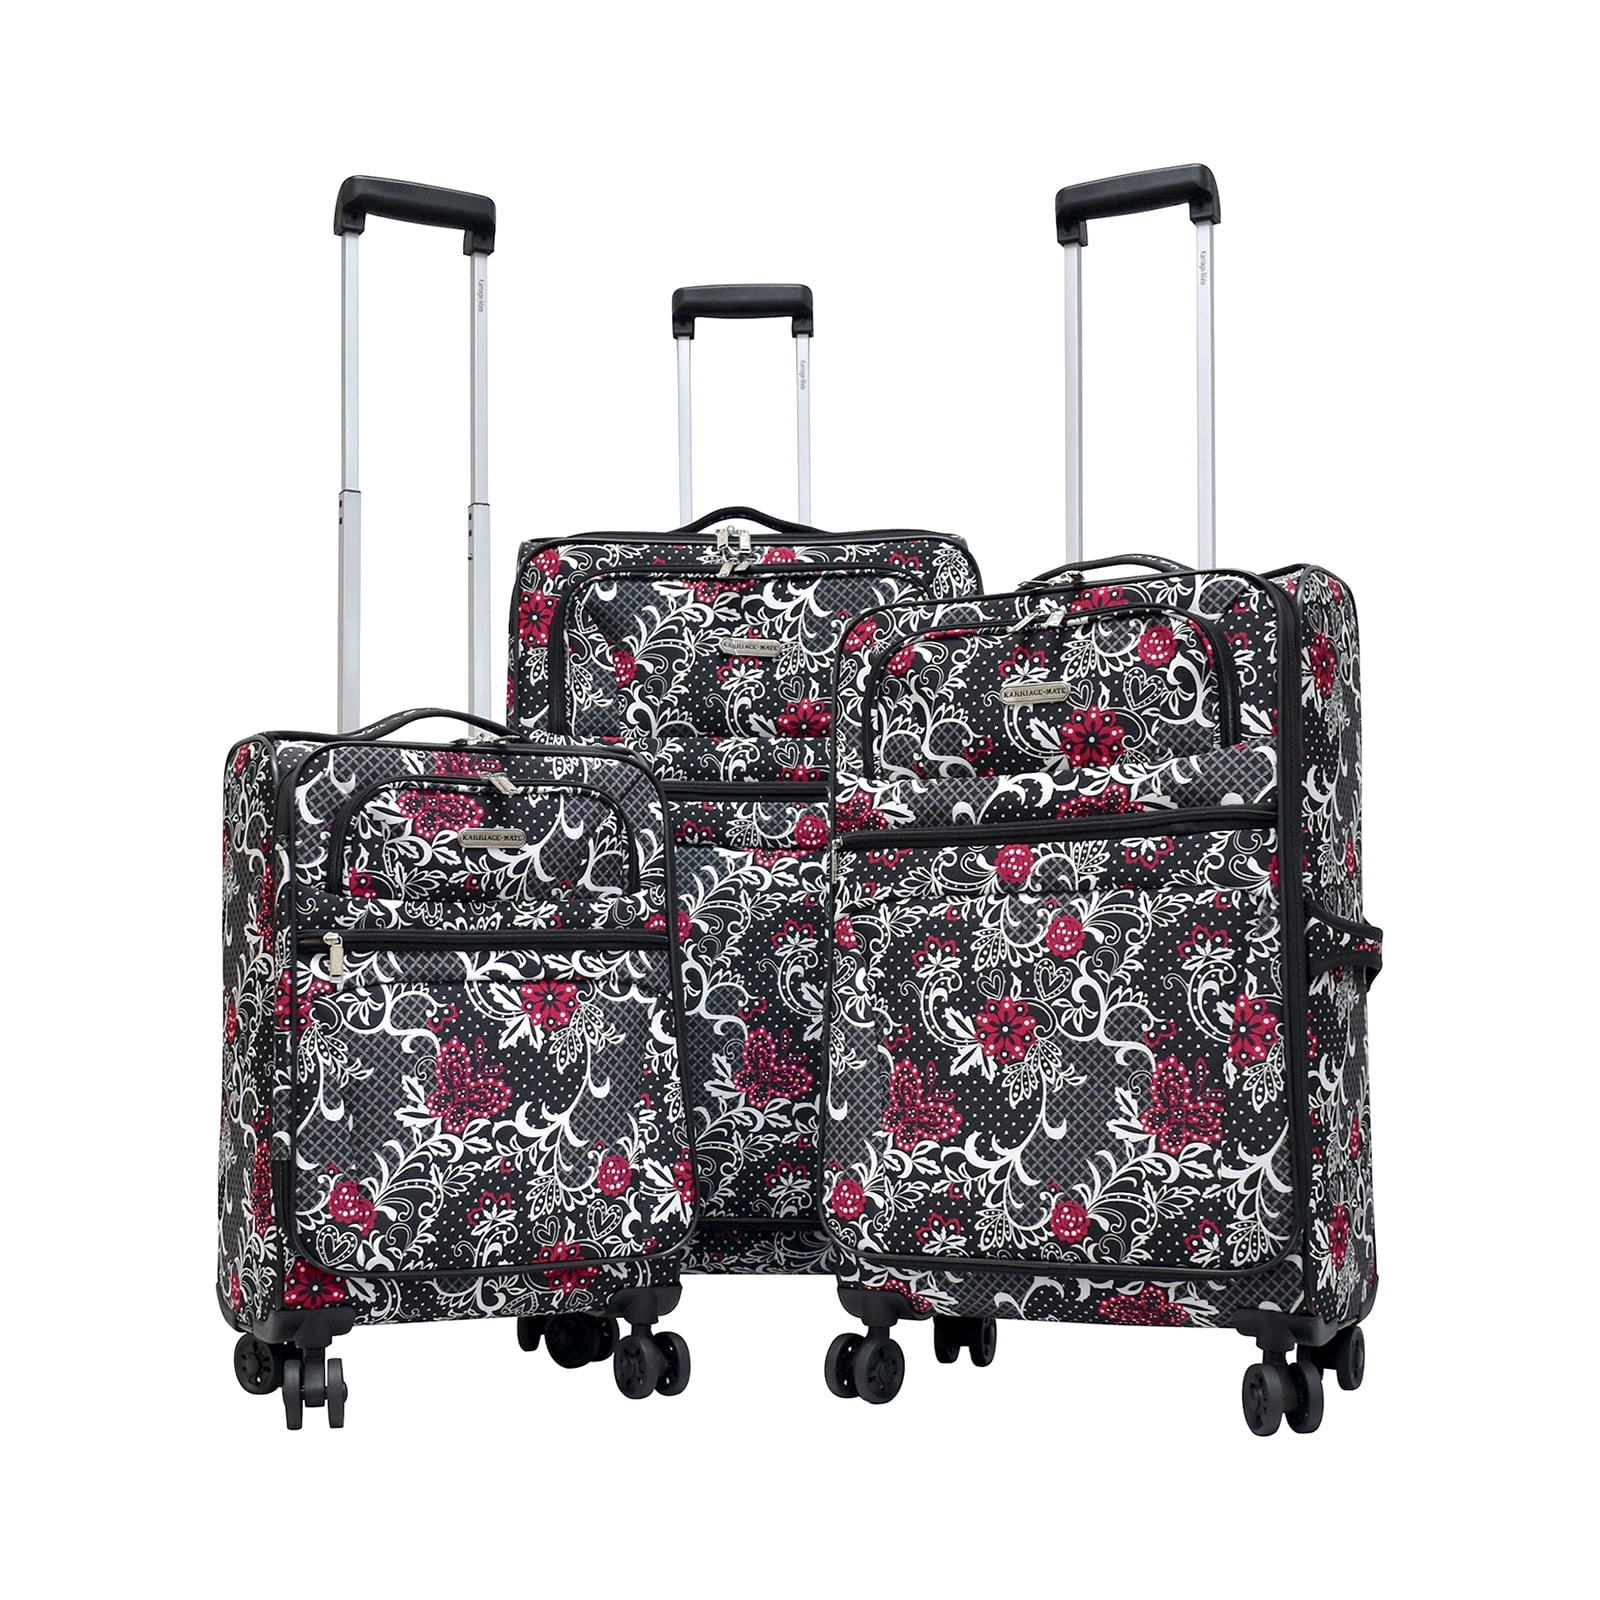 Karriage-Mate 3 pieces soft-side luggage set (20, 24 & 28 inches